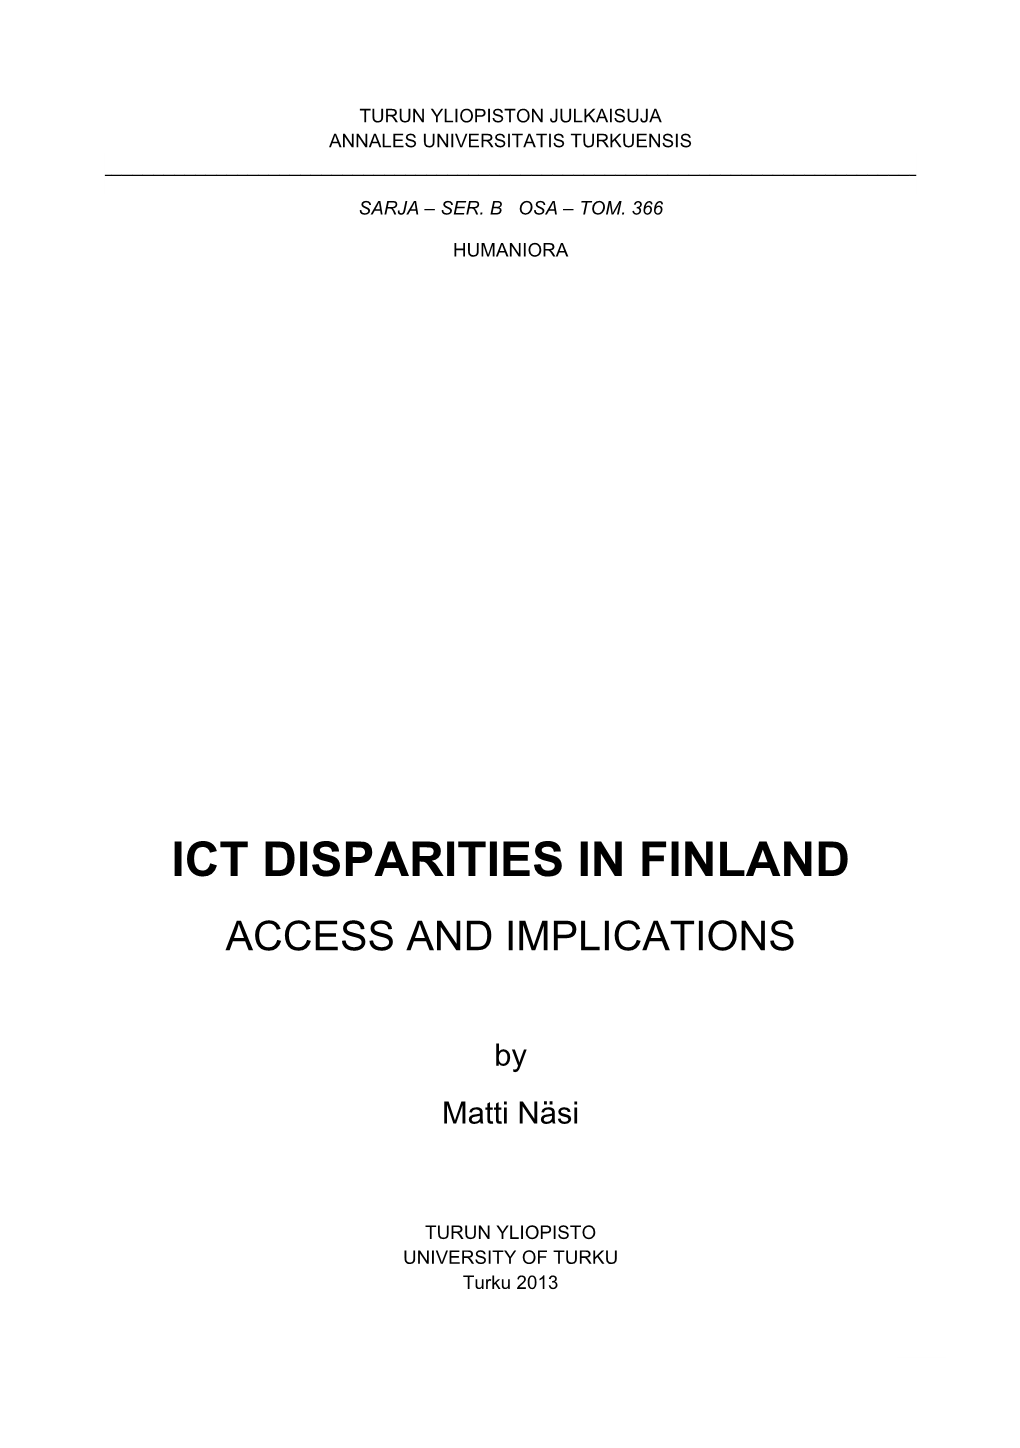 Ict Disparities in Finland Access and Implications